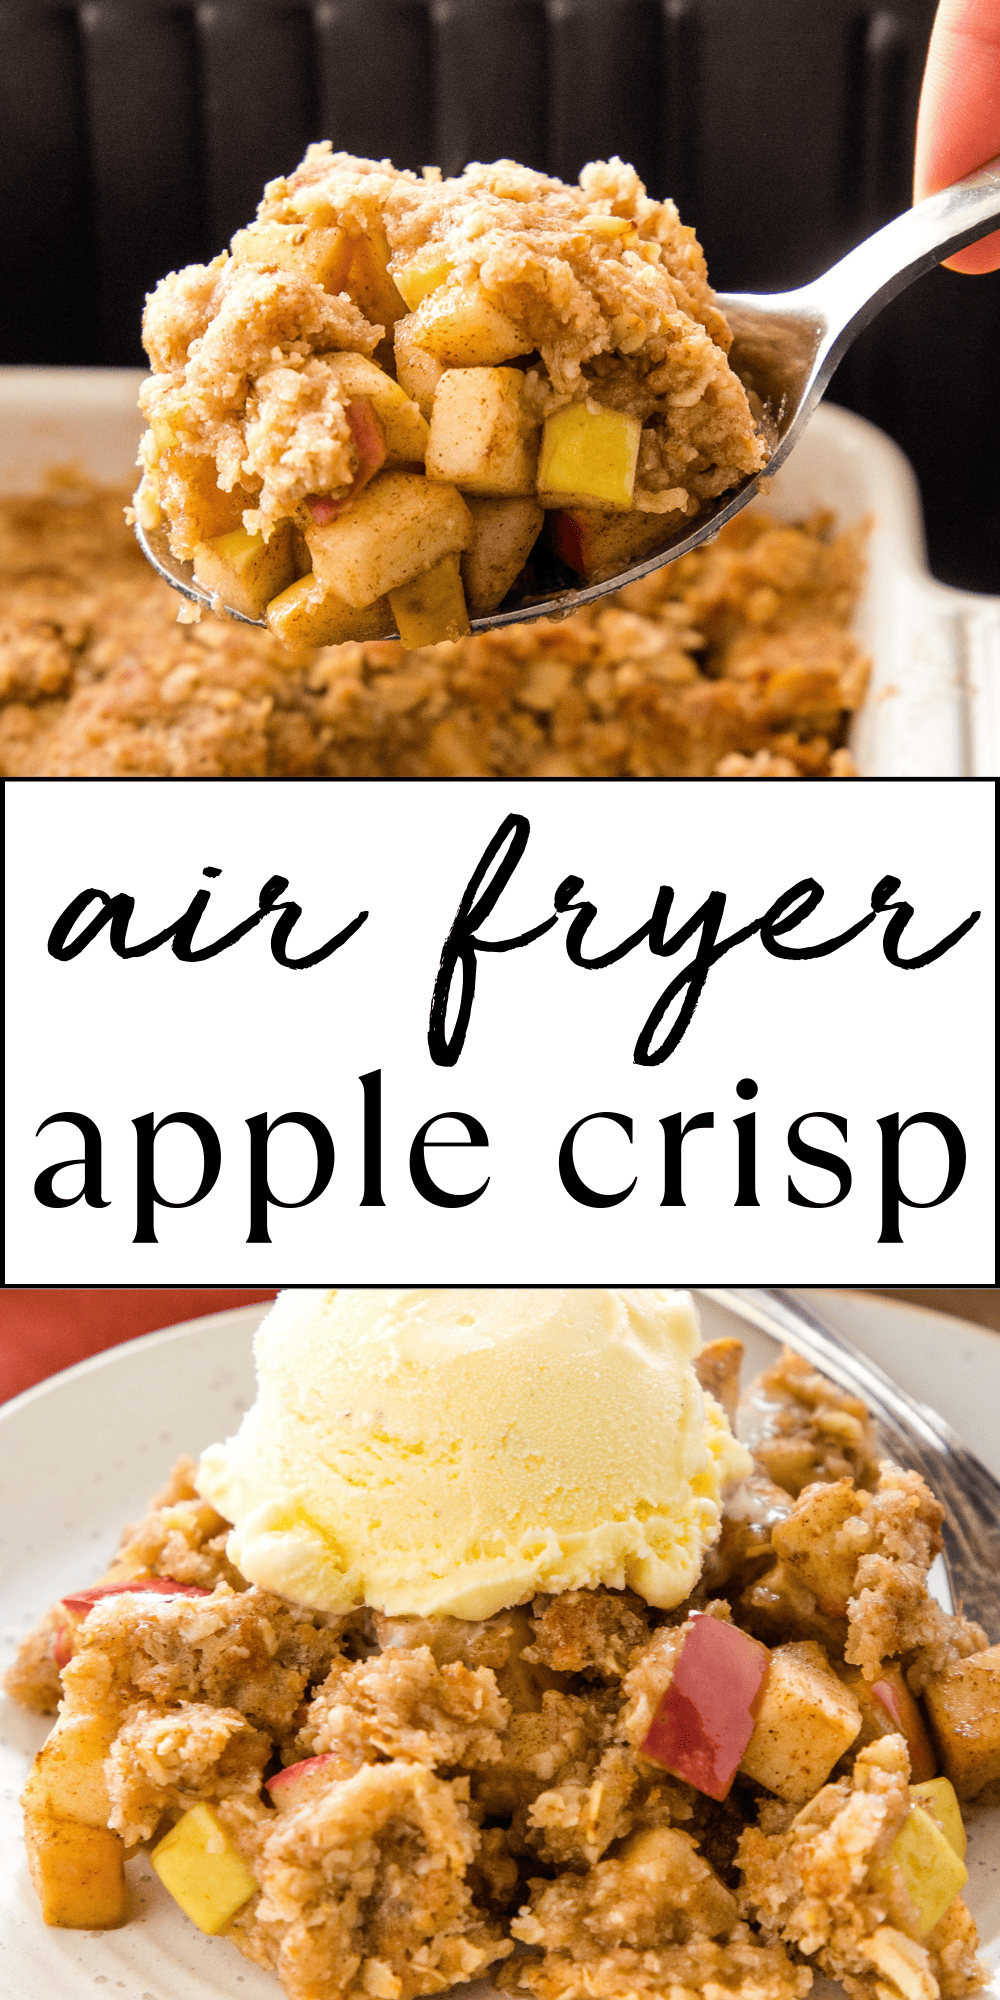 This Air Fryer Apple Crisp is the perfect easy dessert! An easy apple crisp recipe made with fresh chopped apples, fragrant spices and an simple oat topping. Recipe from thebusybaker.ca! #airfryerapplecrisp #applecrisp #easydessert #easyapplecrisp #appledessert #applecrumble #airfryerdessert #airfryerrecipe via @busybakerblog